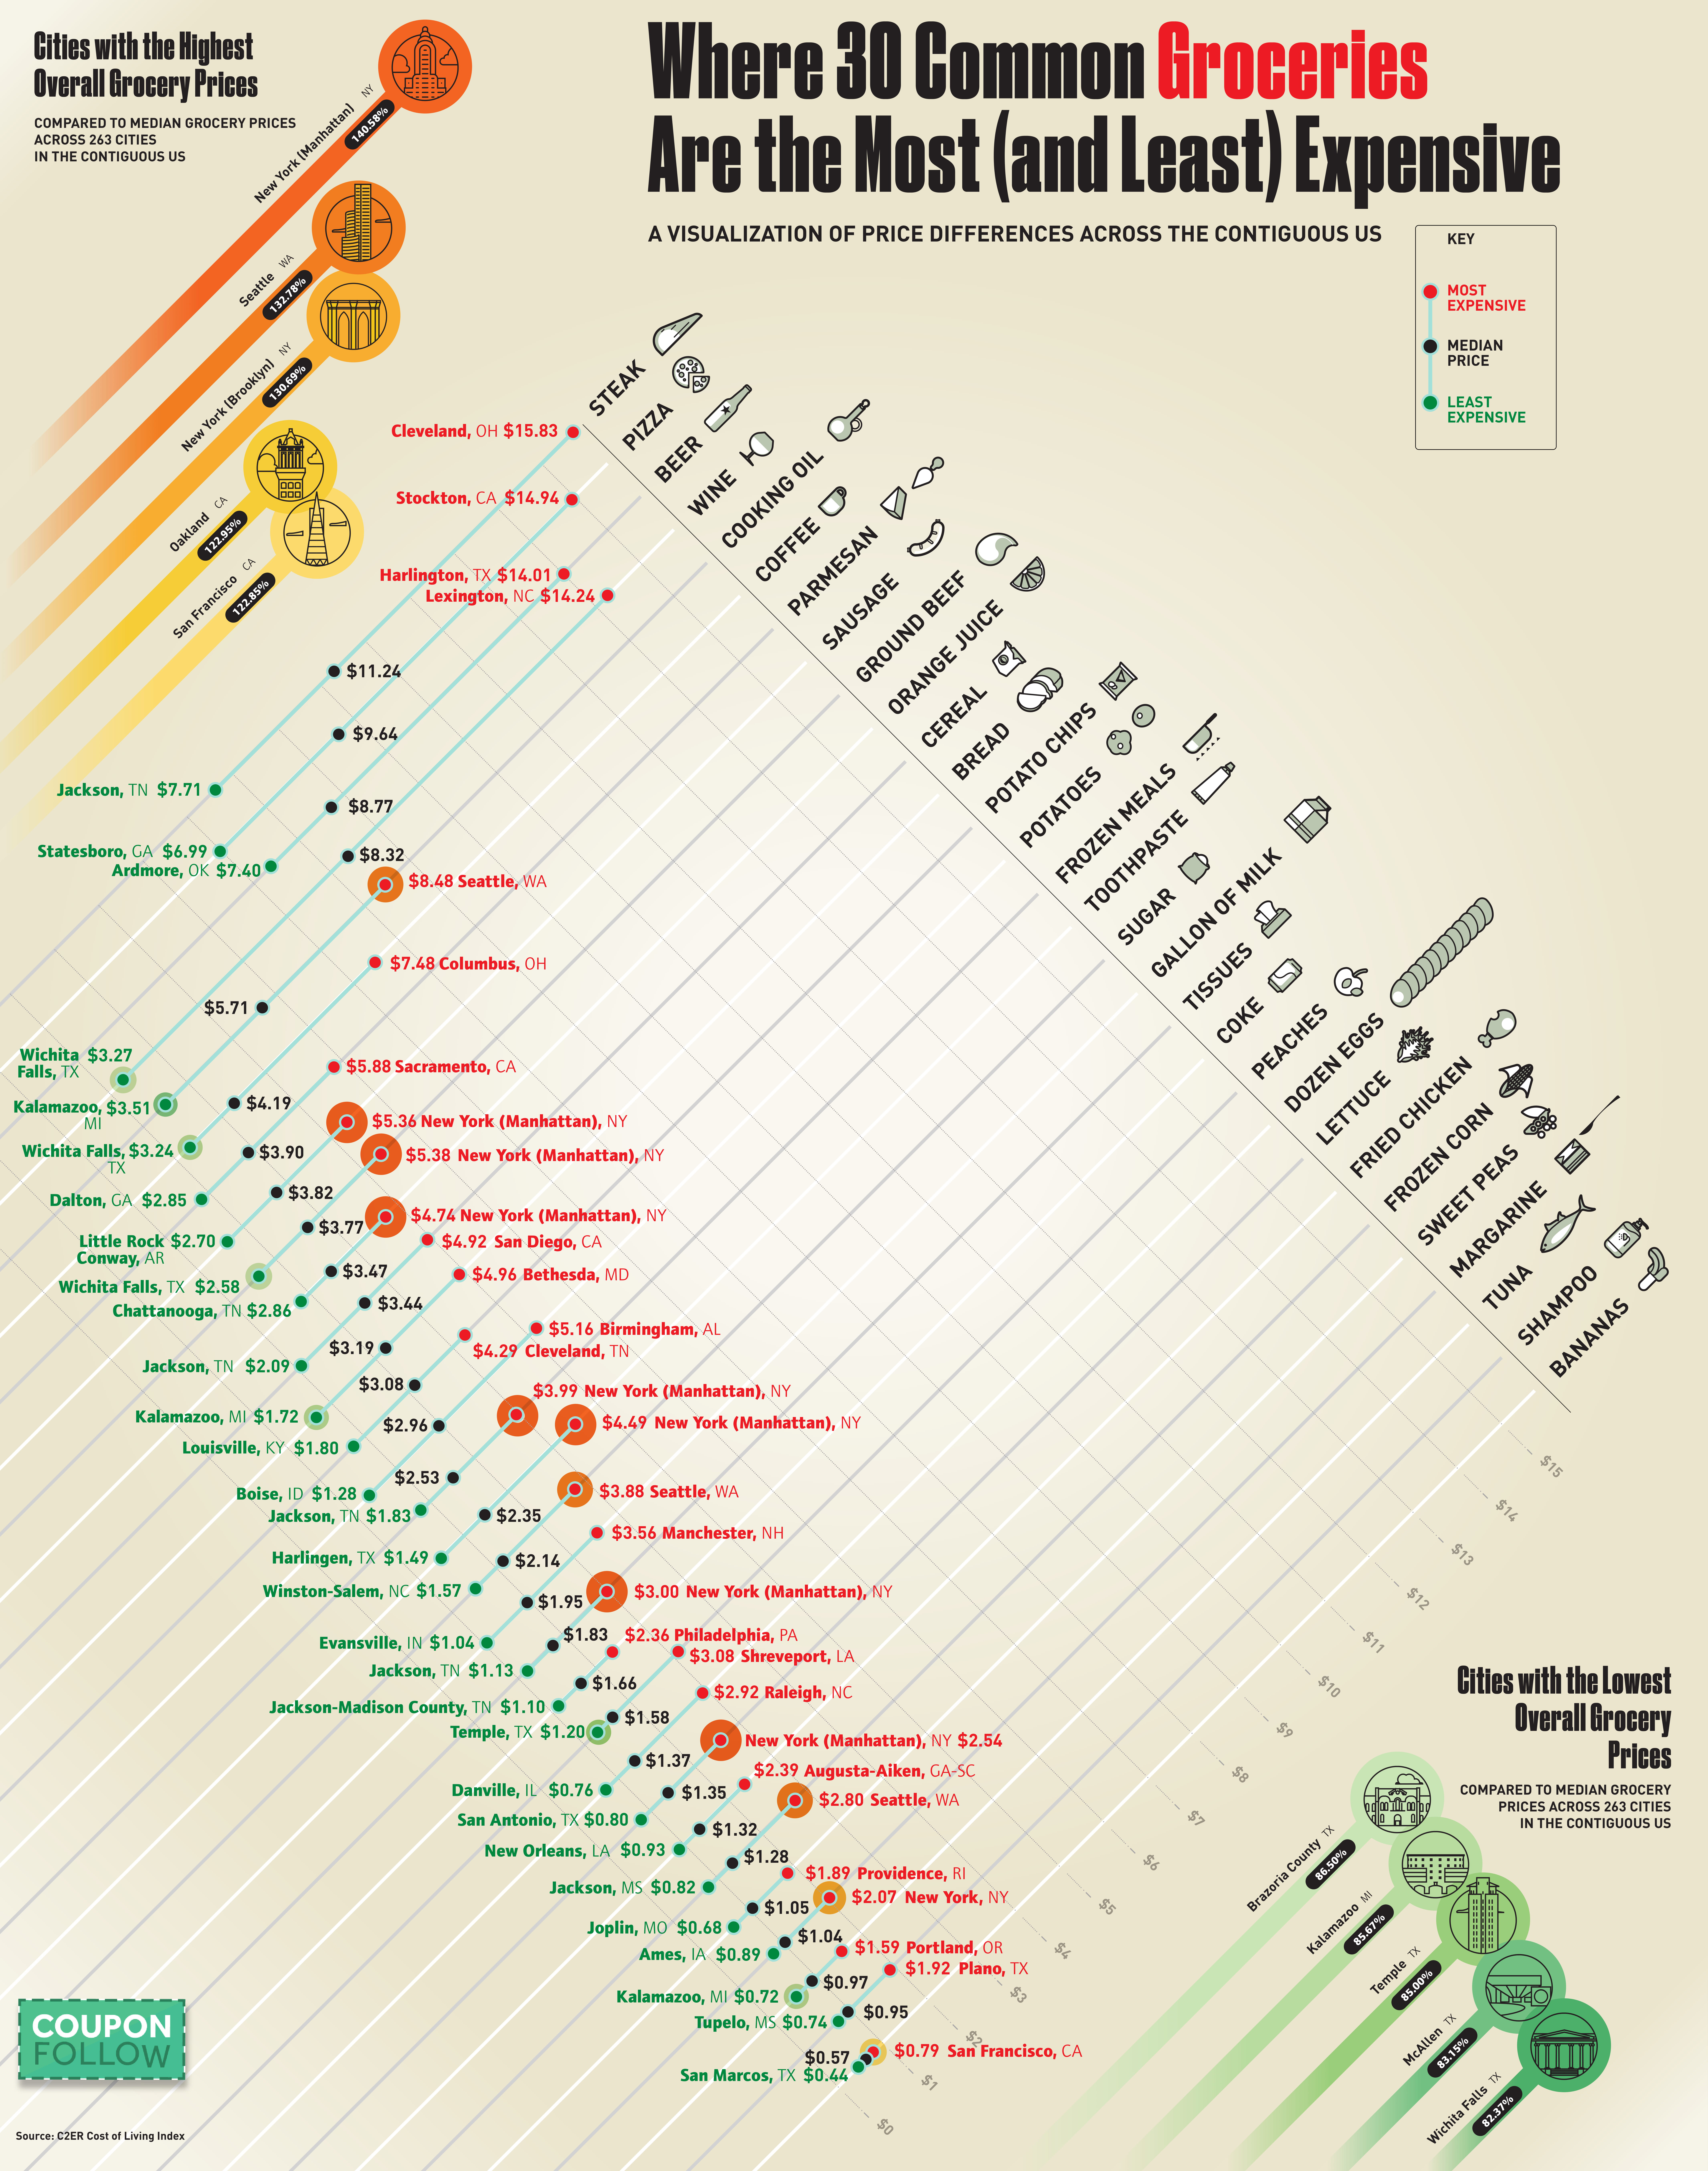 Are Your Grocery Prices Fair? Price Comparison Chart of 30 Common Groceries - Infographic